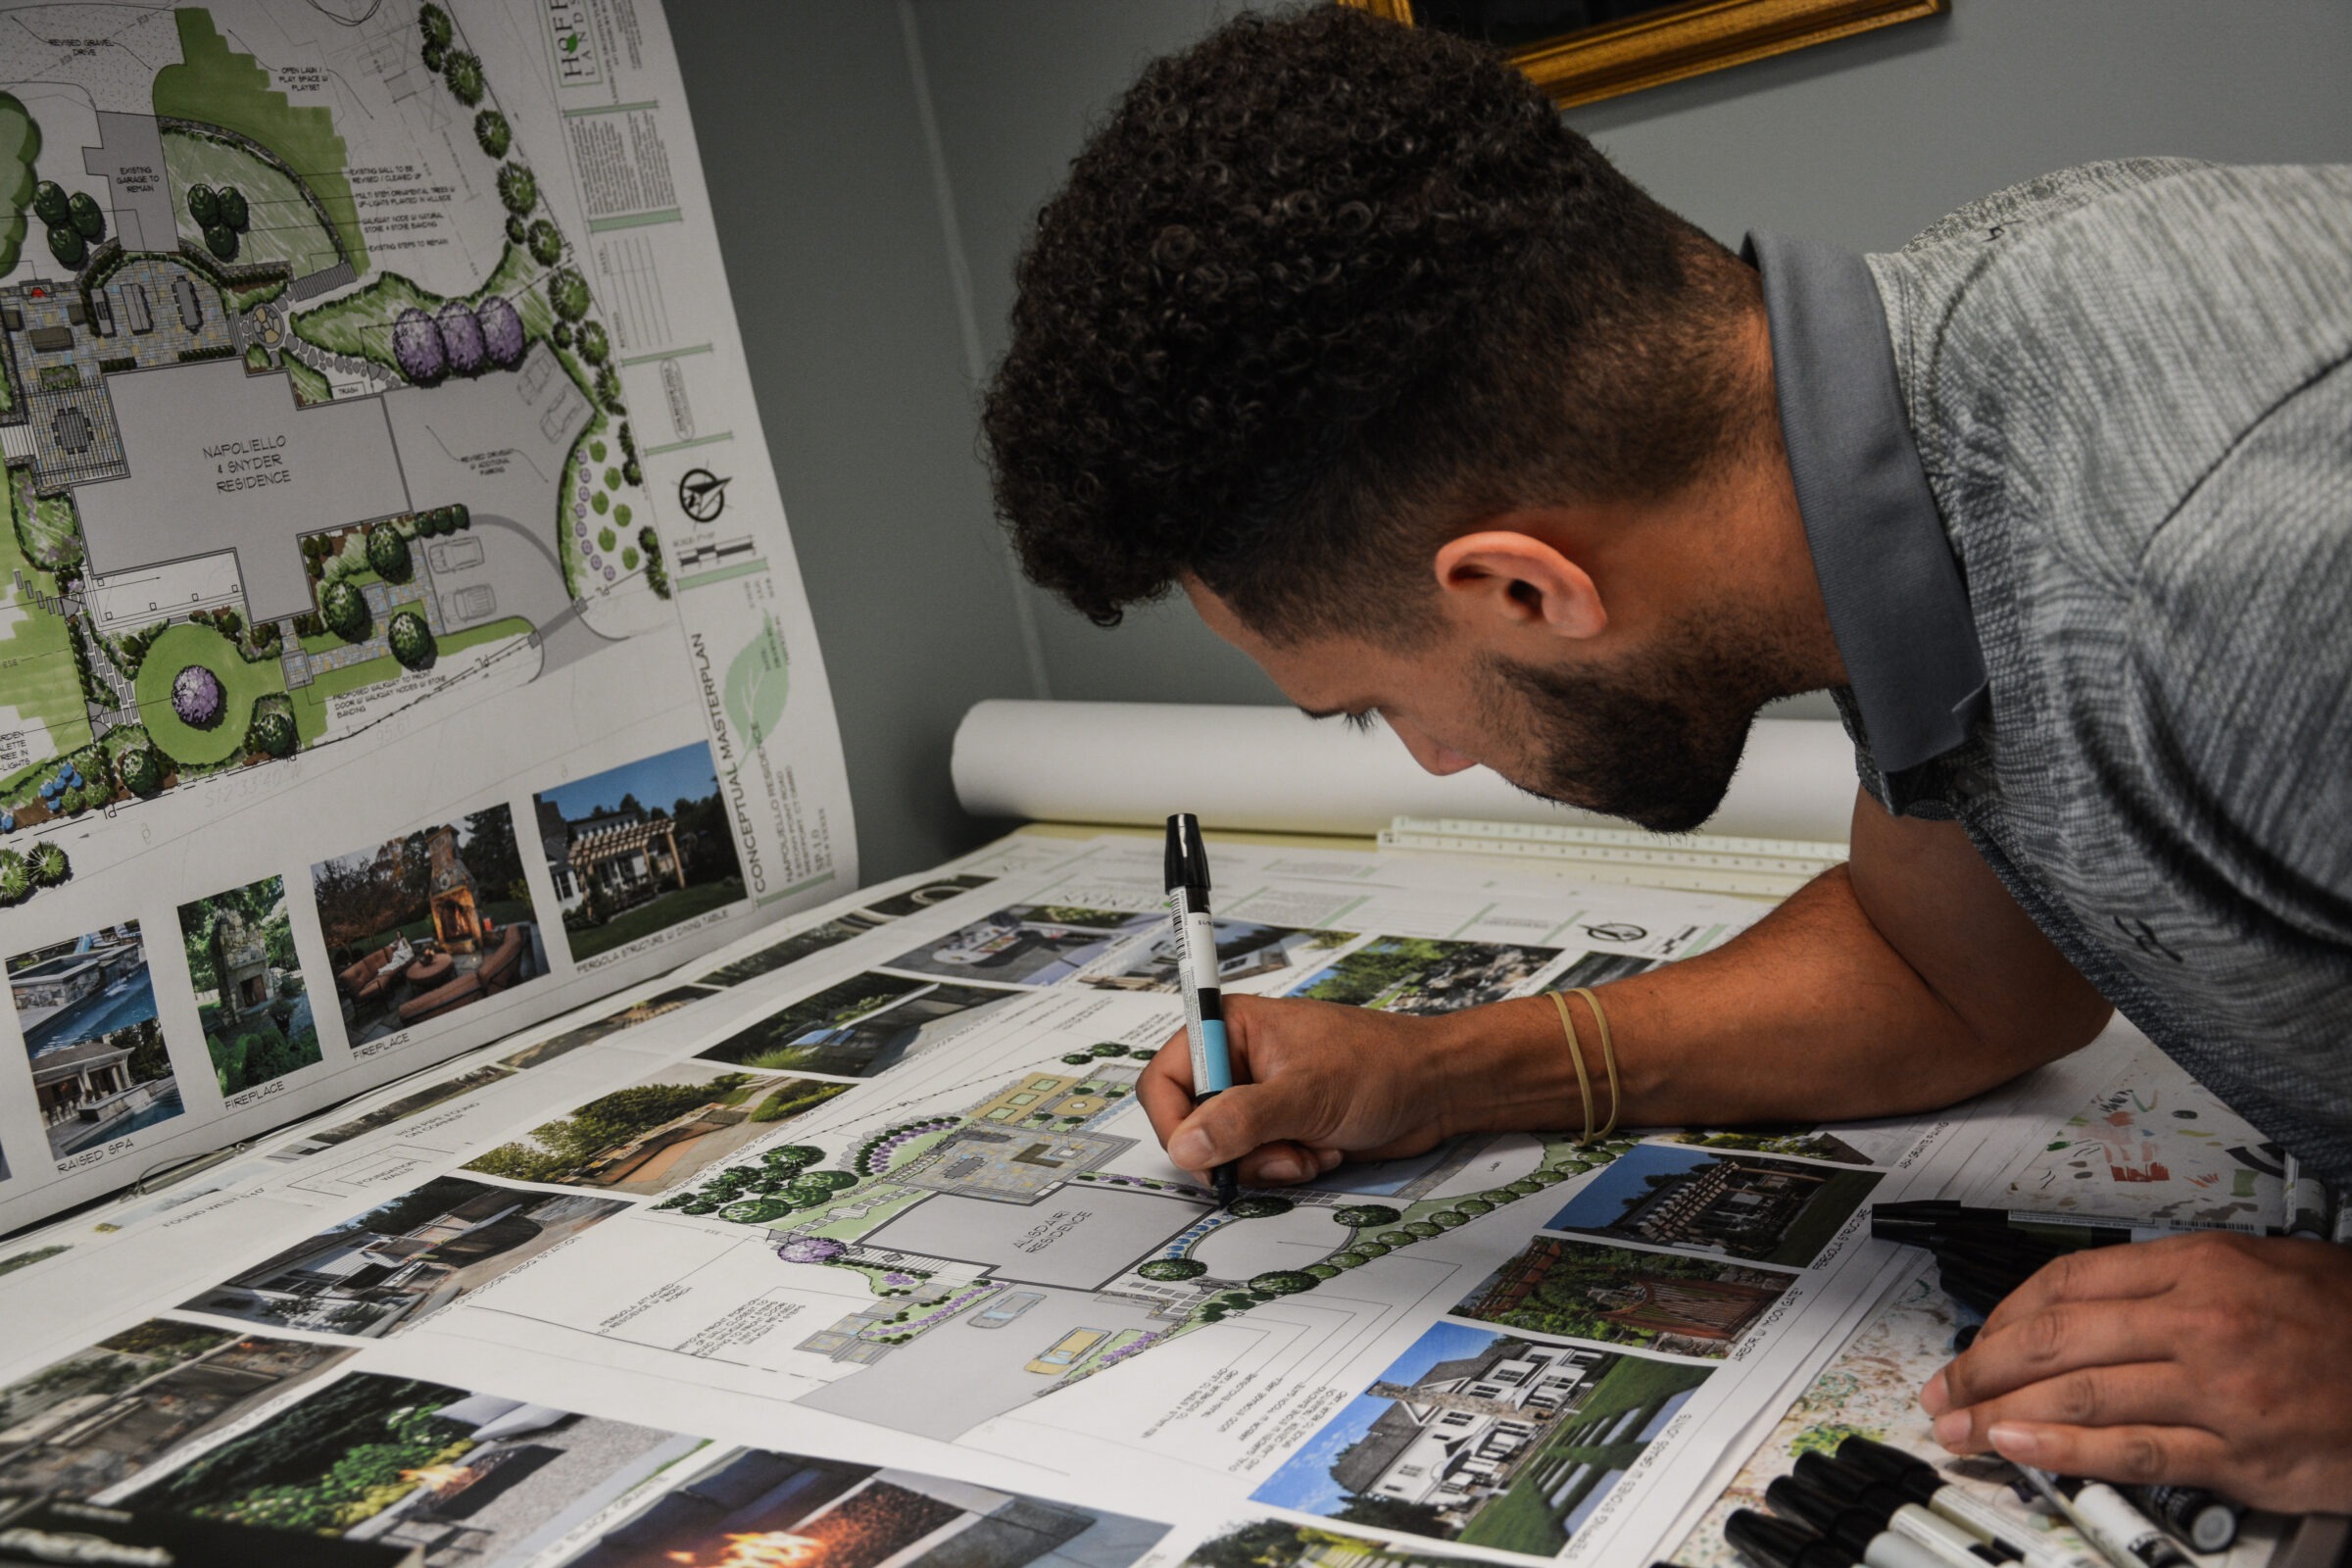 A person is intently working on architectural drawings and landscape plans spread across a desk, with markers scattered around.